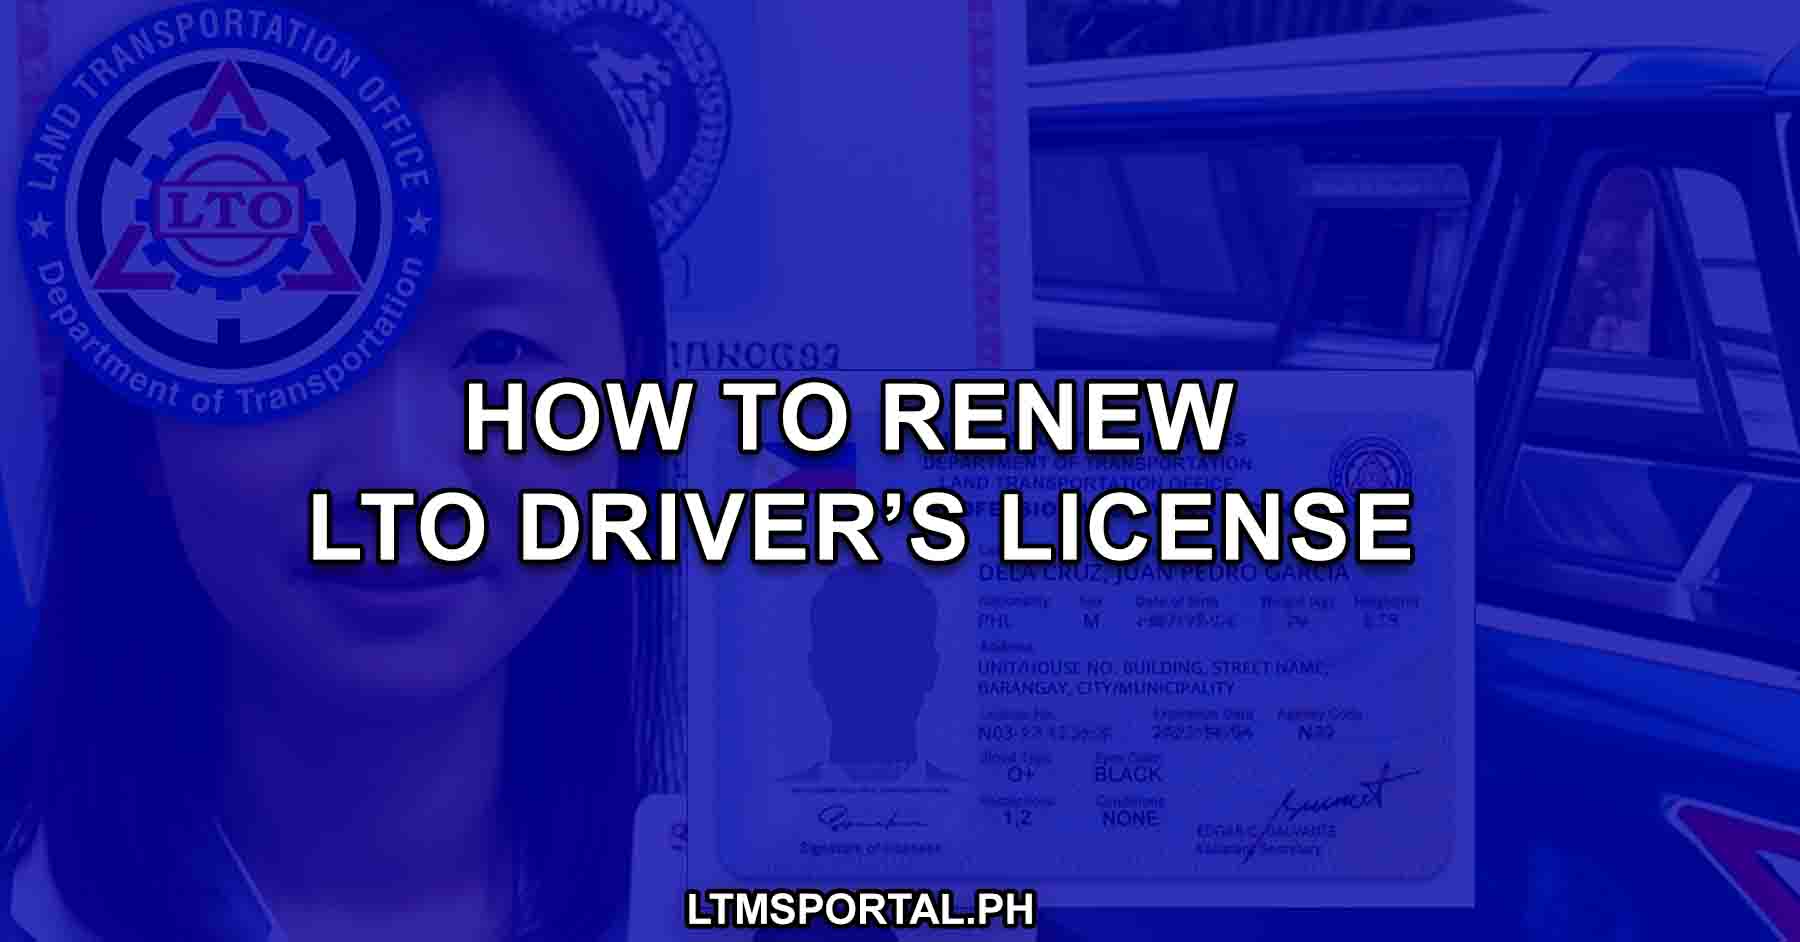 how to renew lto driver's license online